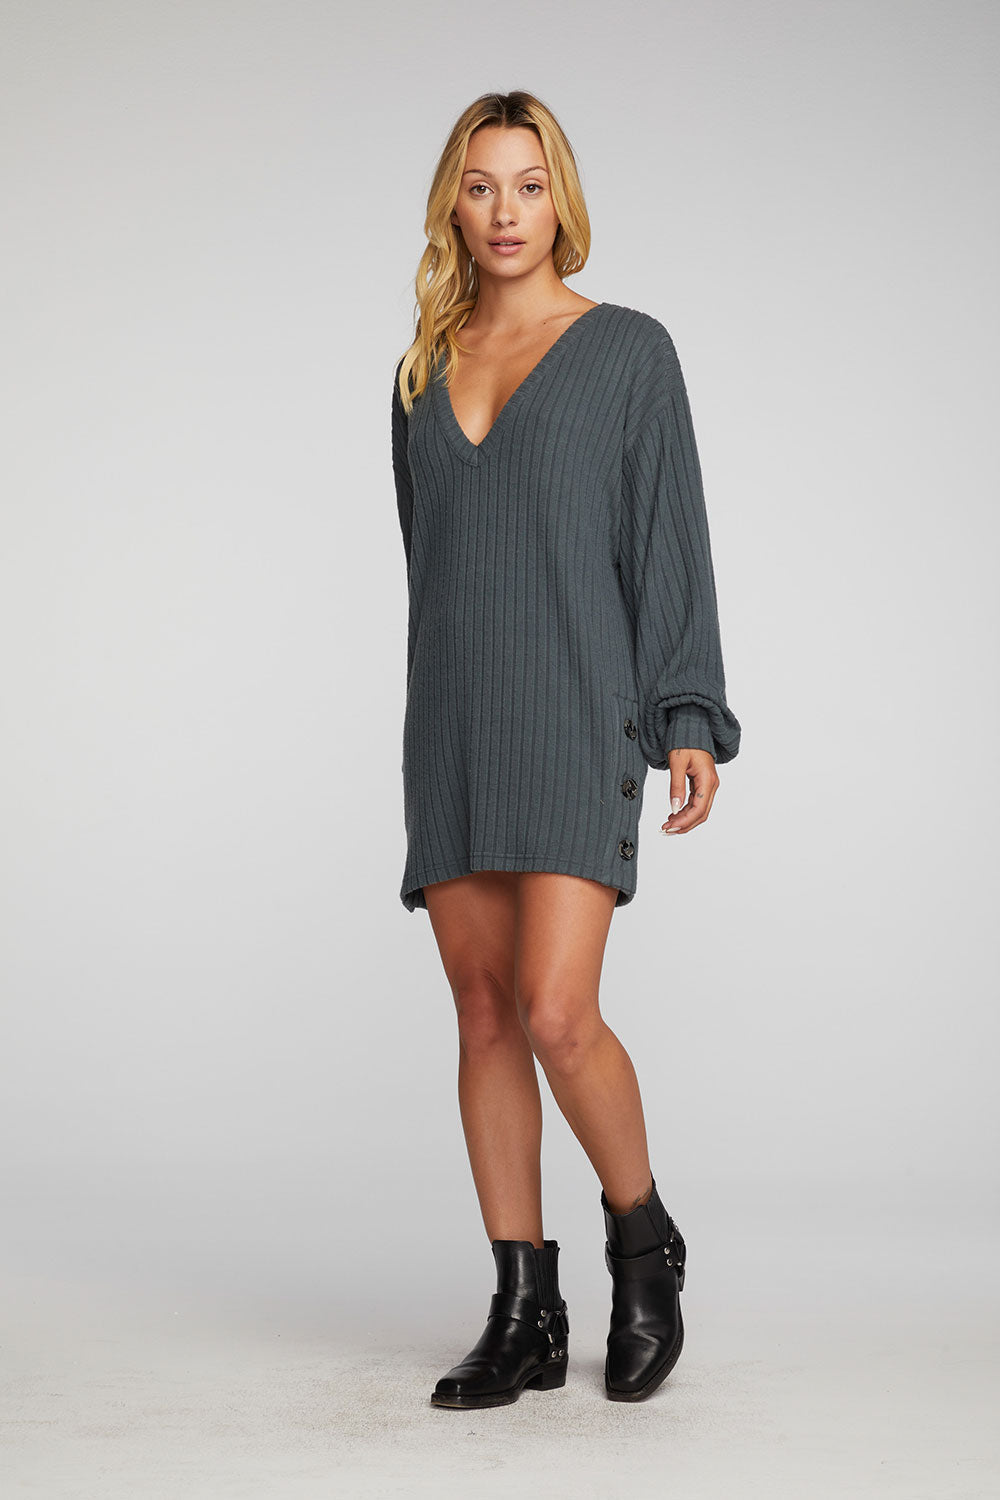 chaser-coda-tunic-charcoal-front-pose